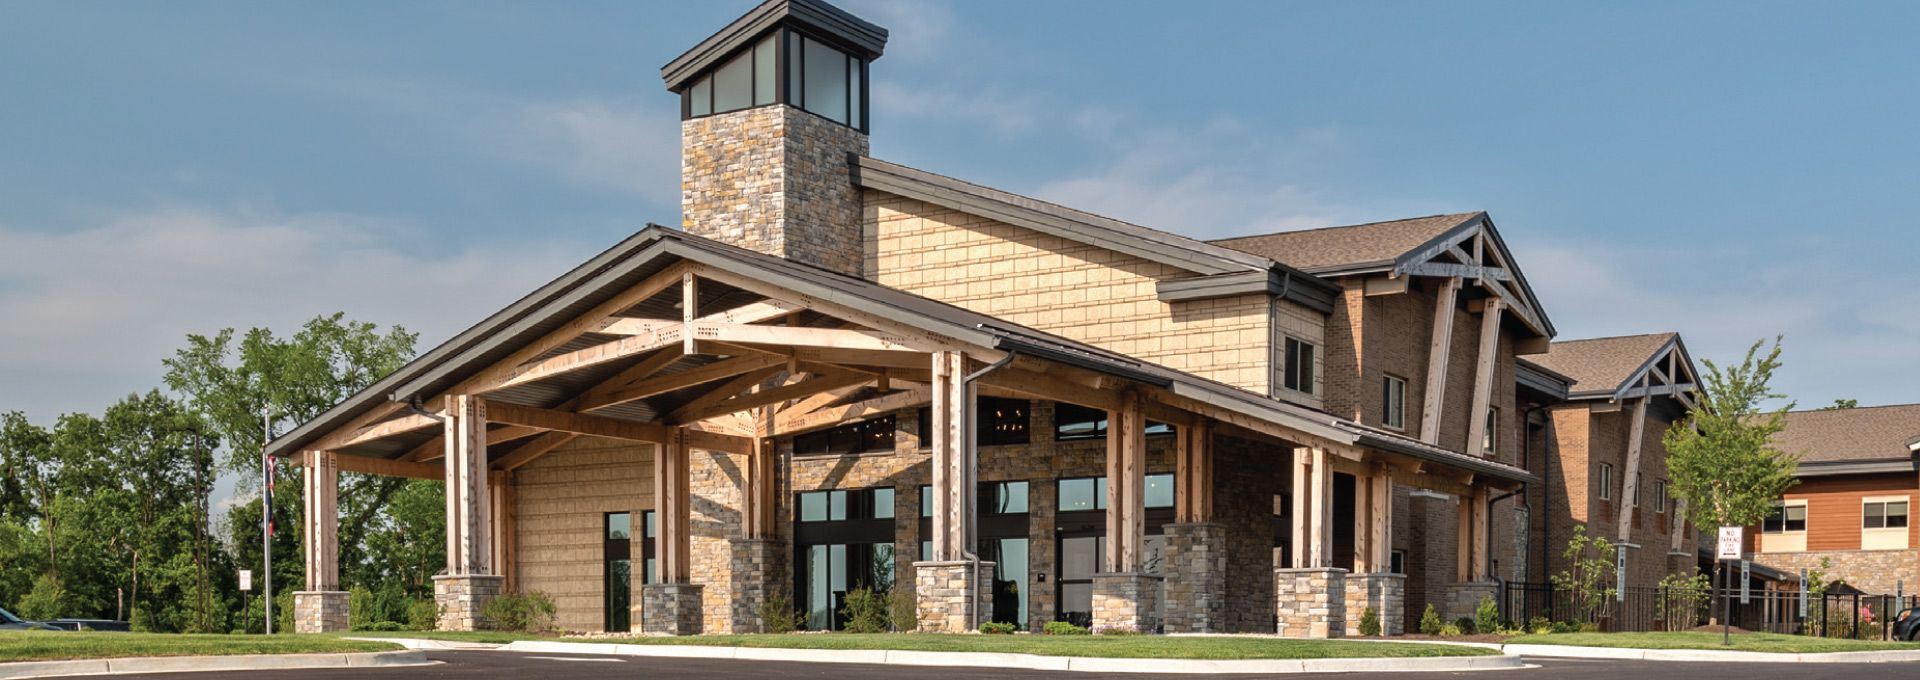 Skilled Nursing Facility Boone County - Boonespring